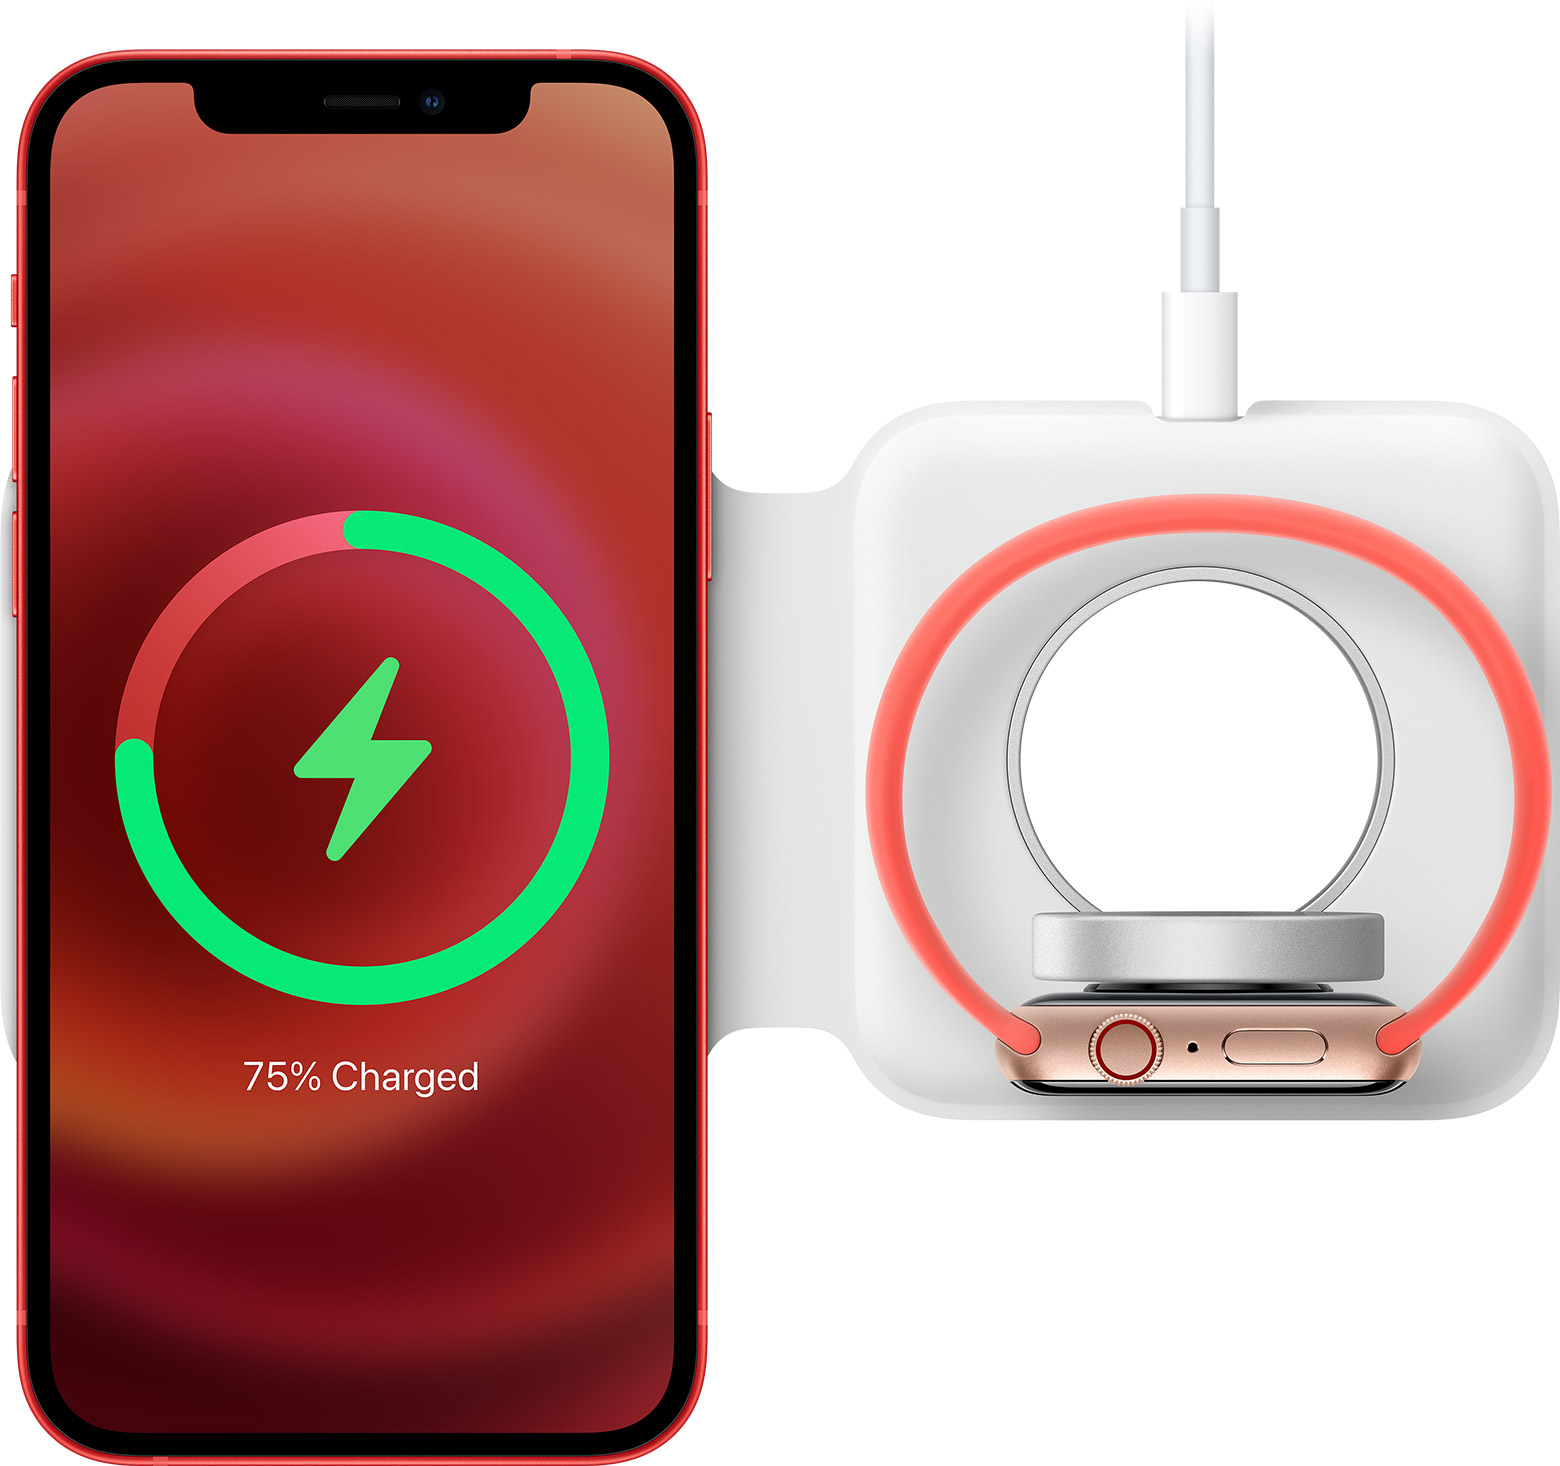 MagSafe Duo Charger lying face up with iPhone and Apple Watch charging